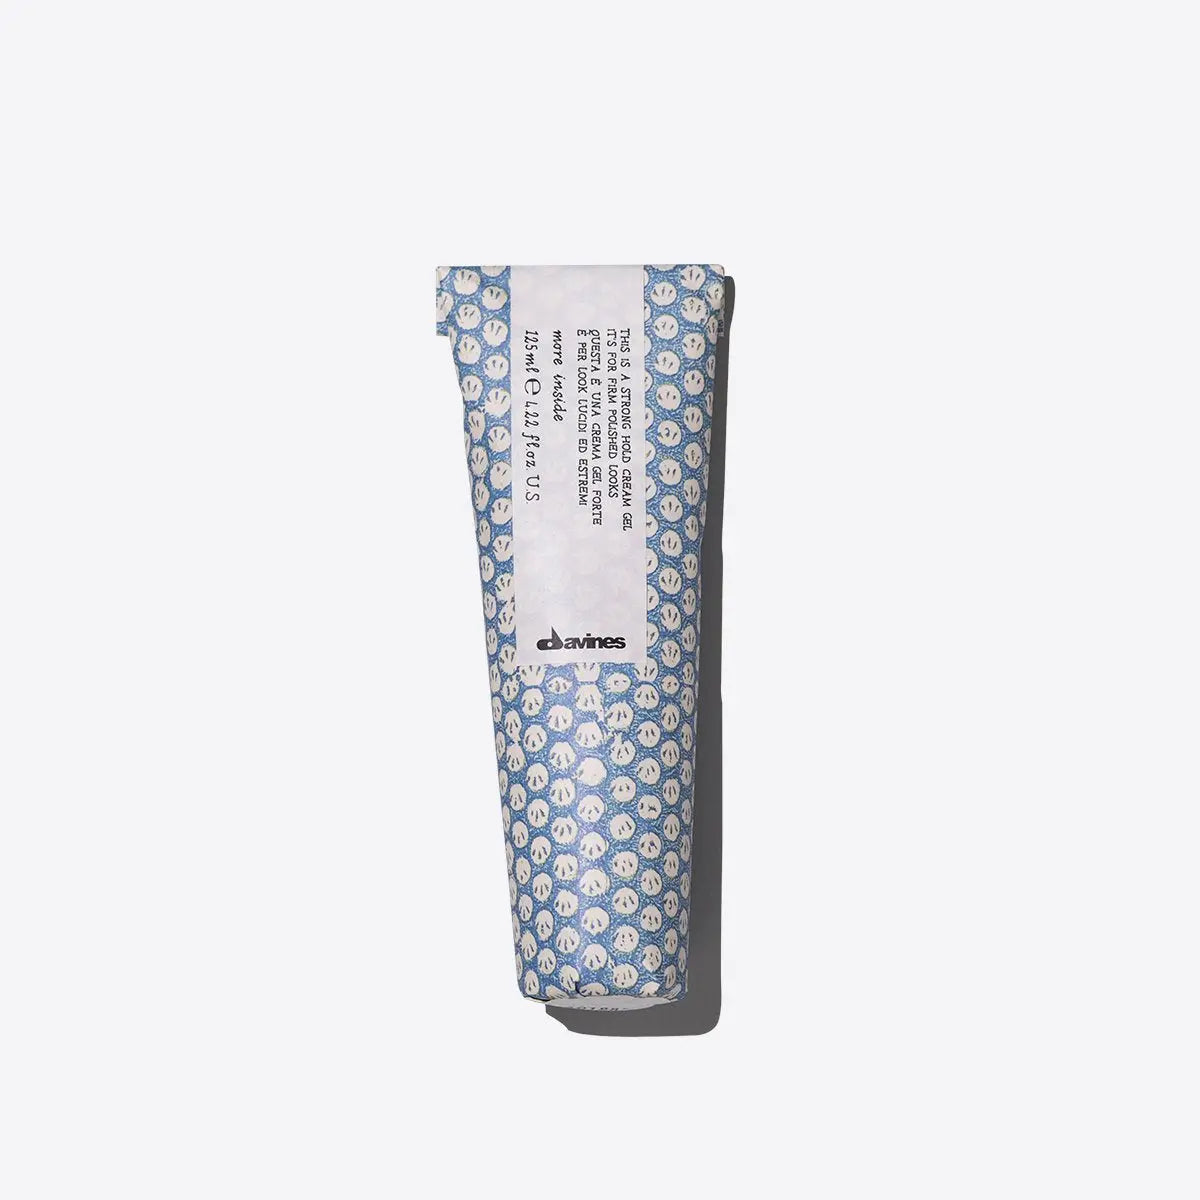 THIS IS A STRONG HOLD CREAM GEL Davines Claudia Iacono